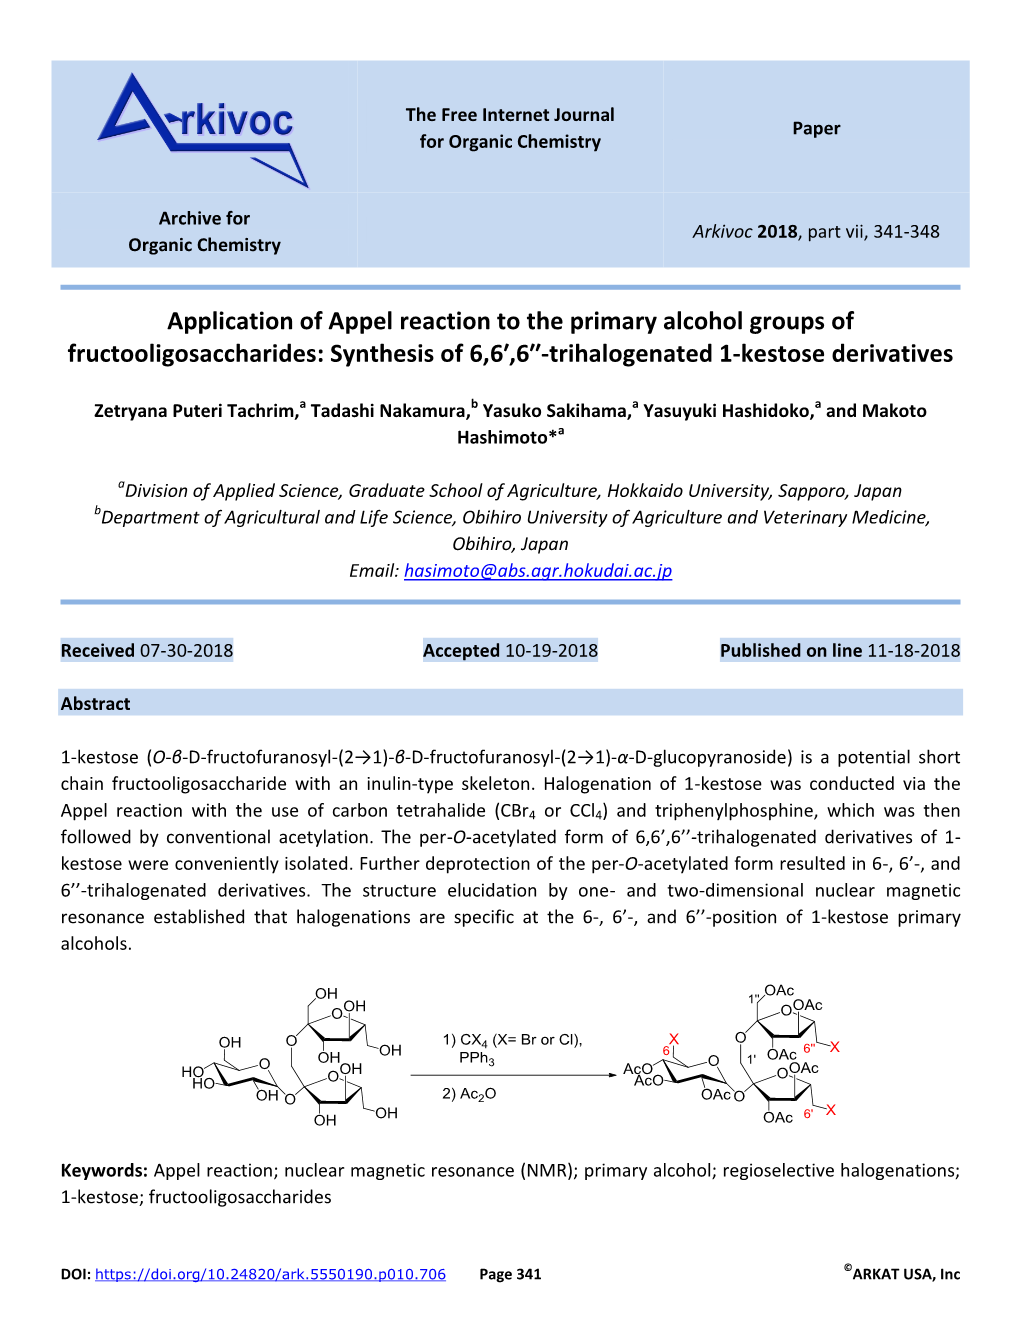 Application of Appel Reaction to the Primary Alcohol Groups of Fructooligosaccharides: Synthesis of 6,6′,6′′-Trihalogenated 1-Kestose Derivatives